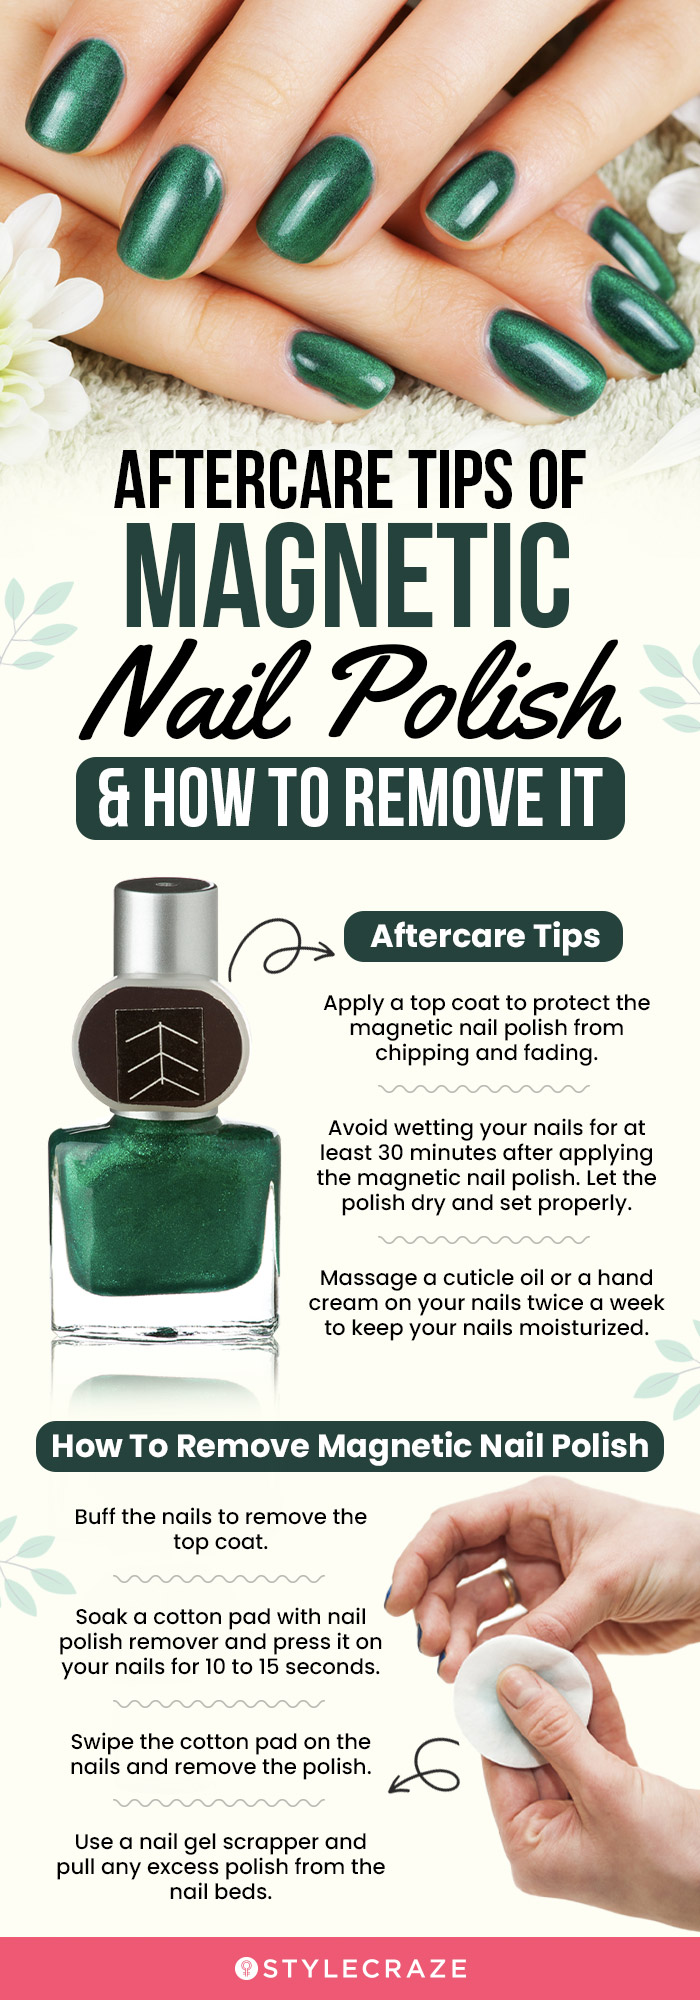 Aftercare Tips of Magnetic Nail Polish & How To Remove It (infographic)